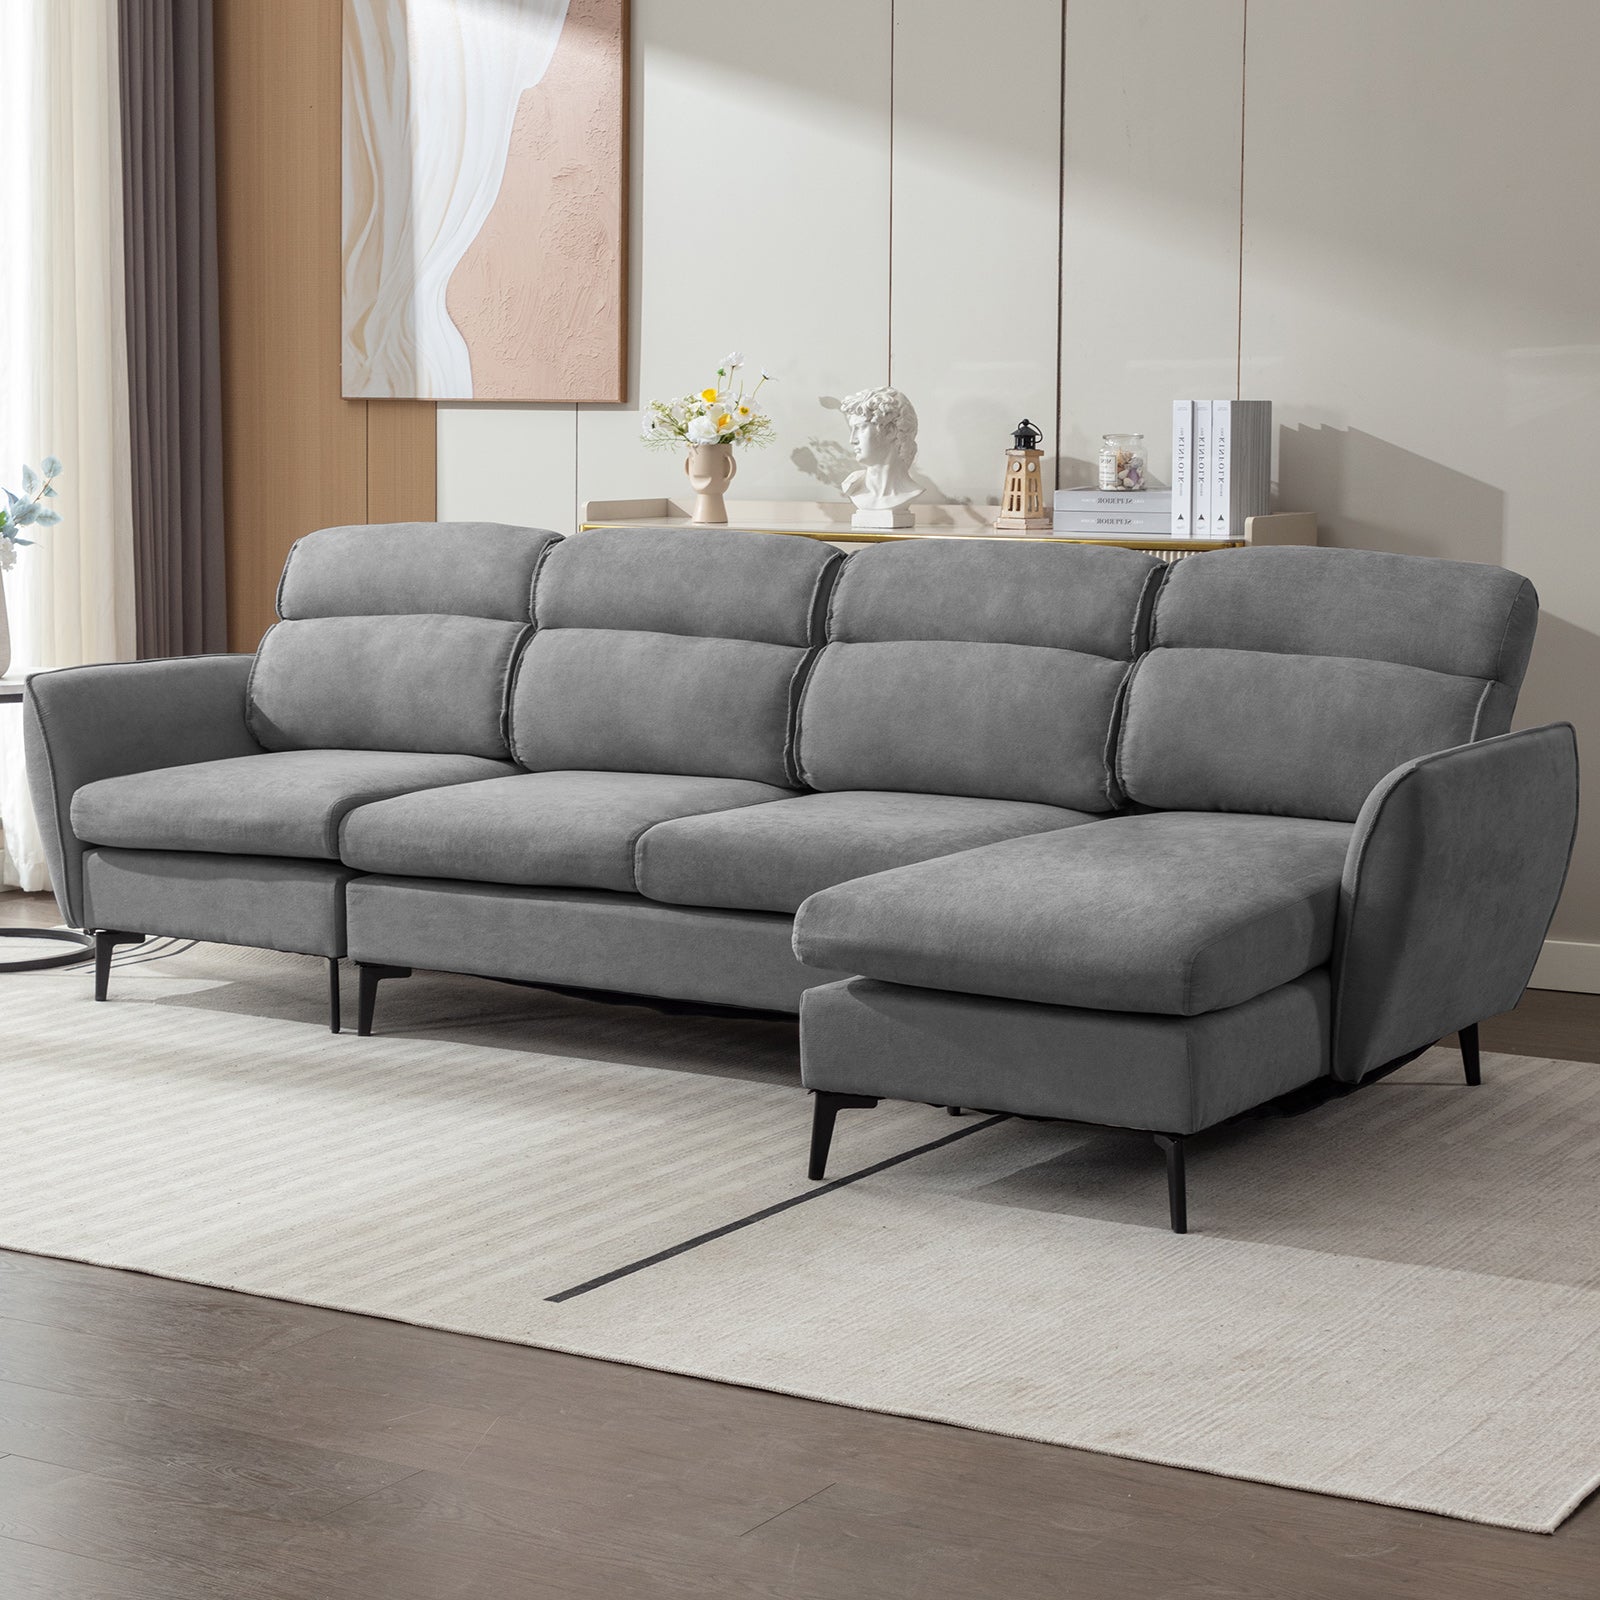 Mjkone Living Room Sofa Set, Linen Sofa Sectional Couches for Living Room with Spacious Seat and Sturdy Wooden Frame